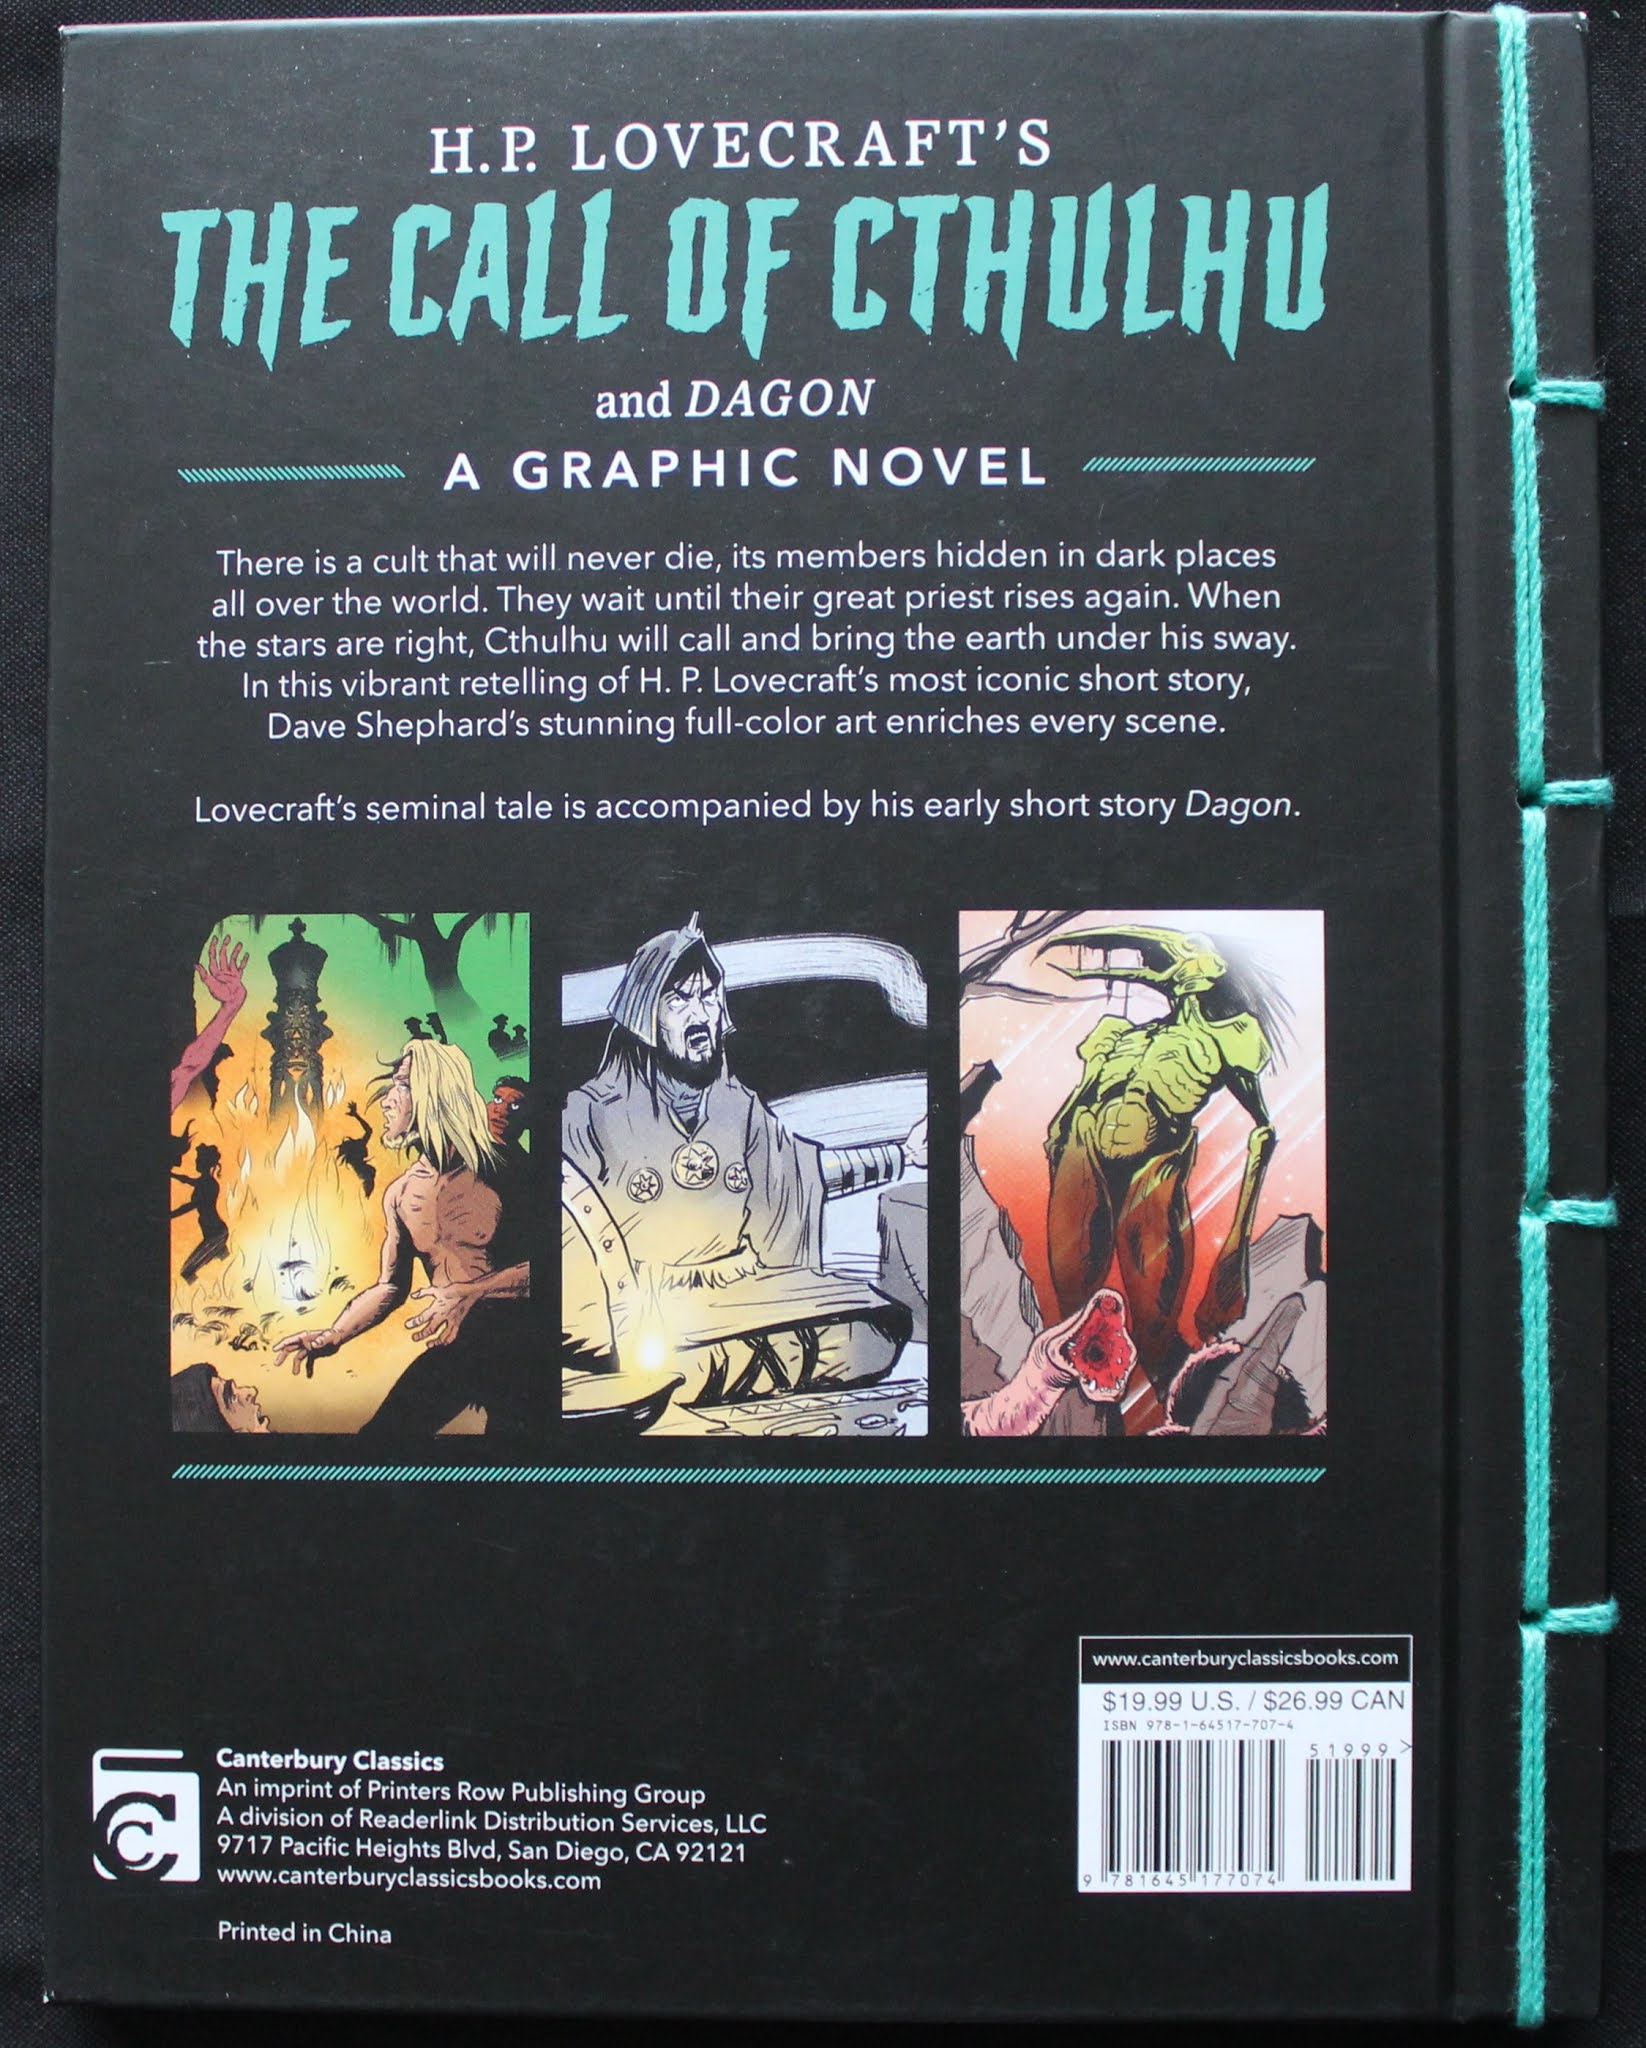 Susurros desde la Oscuridad: The Call of Cthulhu and Dagon (A Graphic